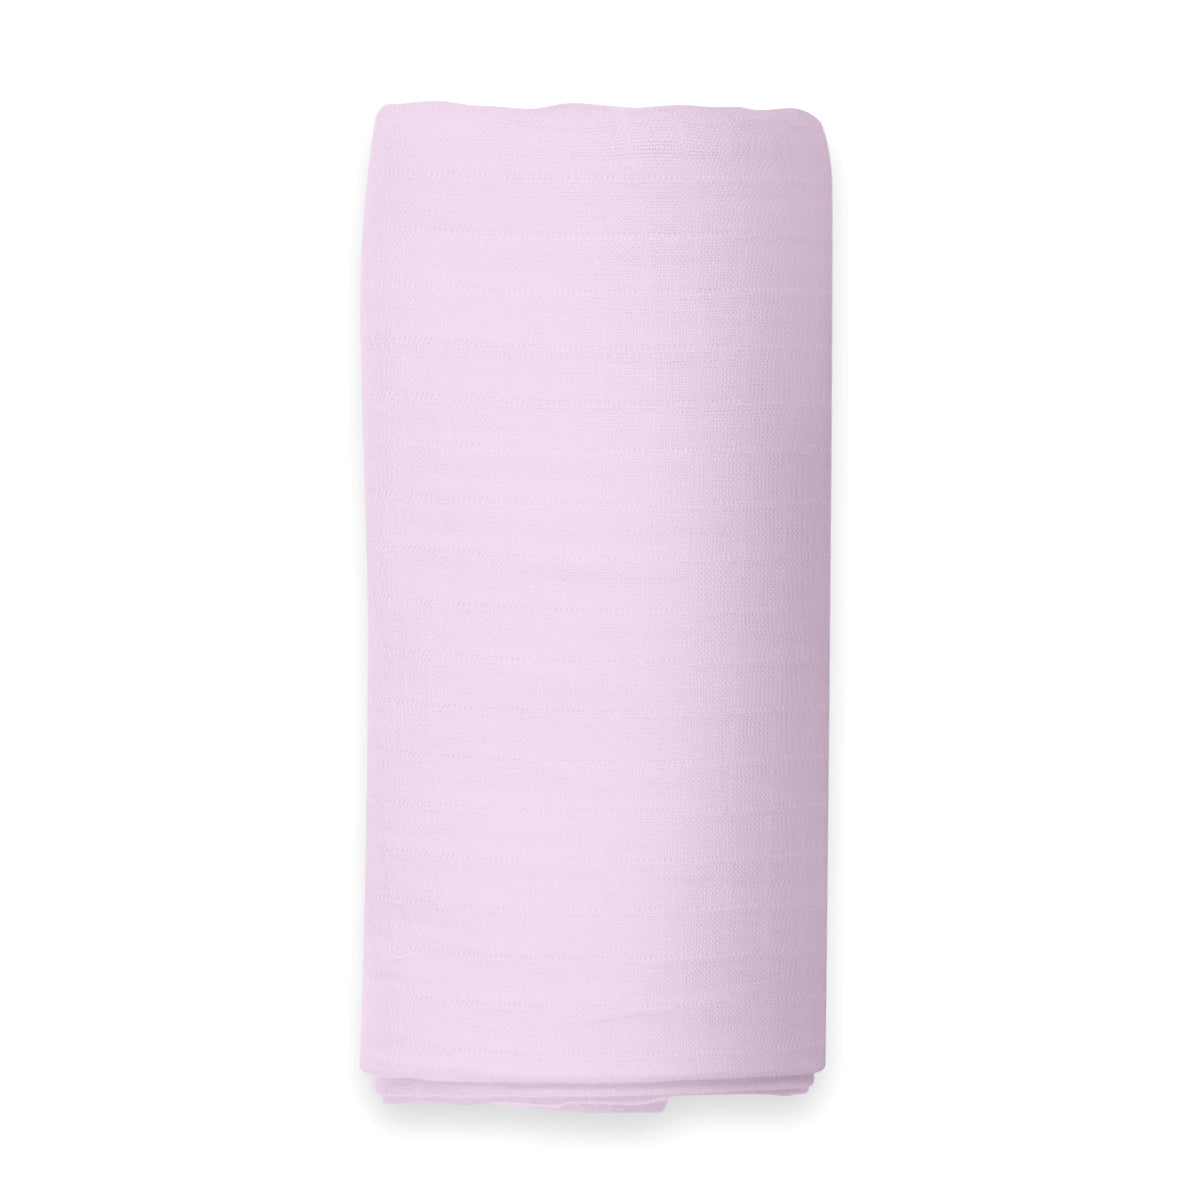 The White Cradle 100% Organic Cotton Baby Swaddle Wrap, Large 112 x 112 cm Super Soft Muslin, 1 pc Pack, Lavender